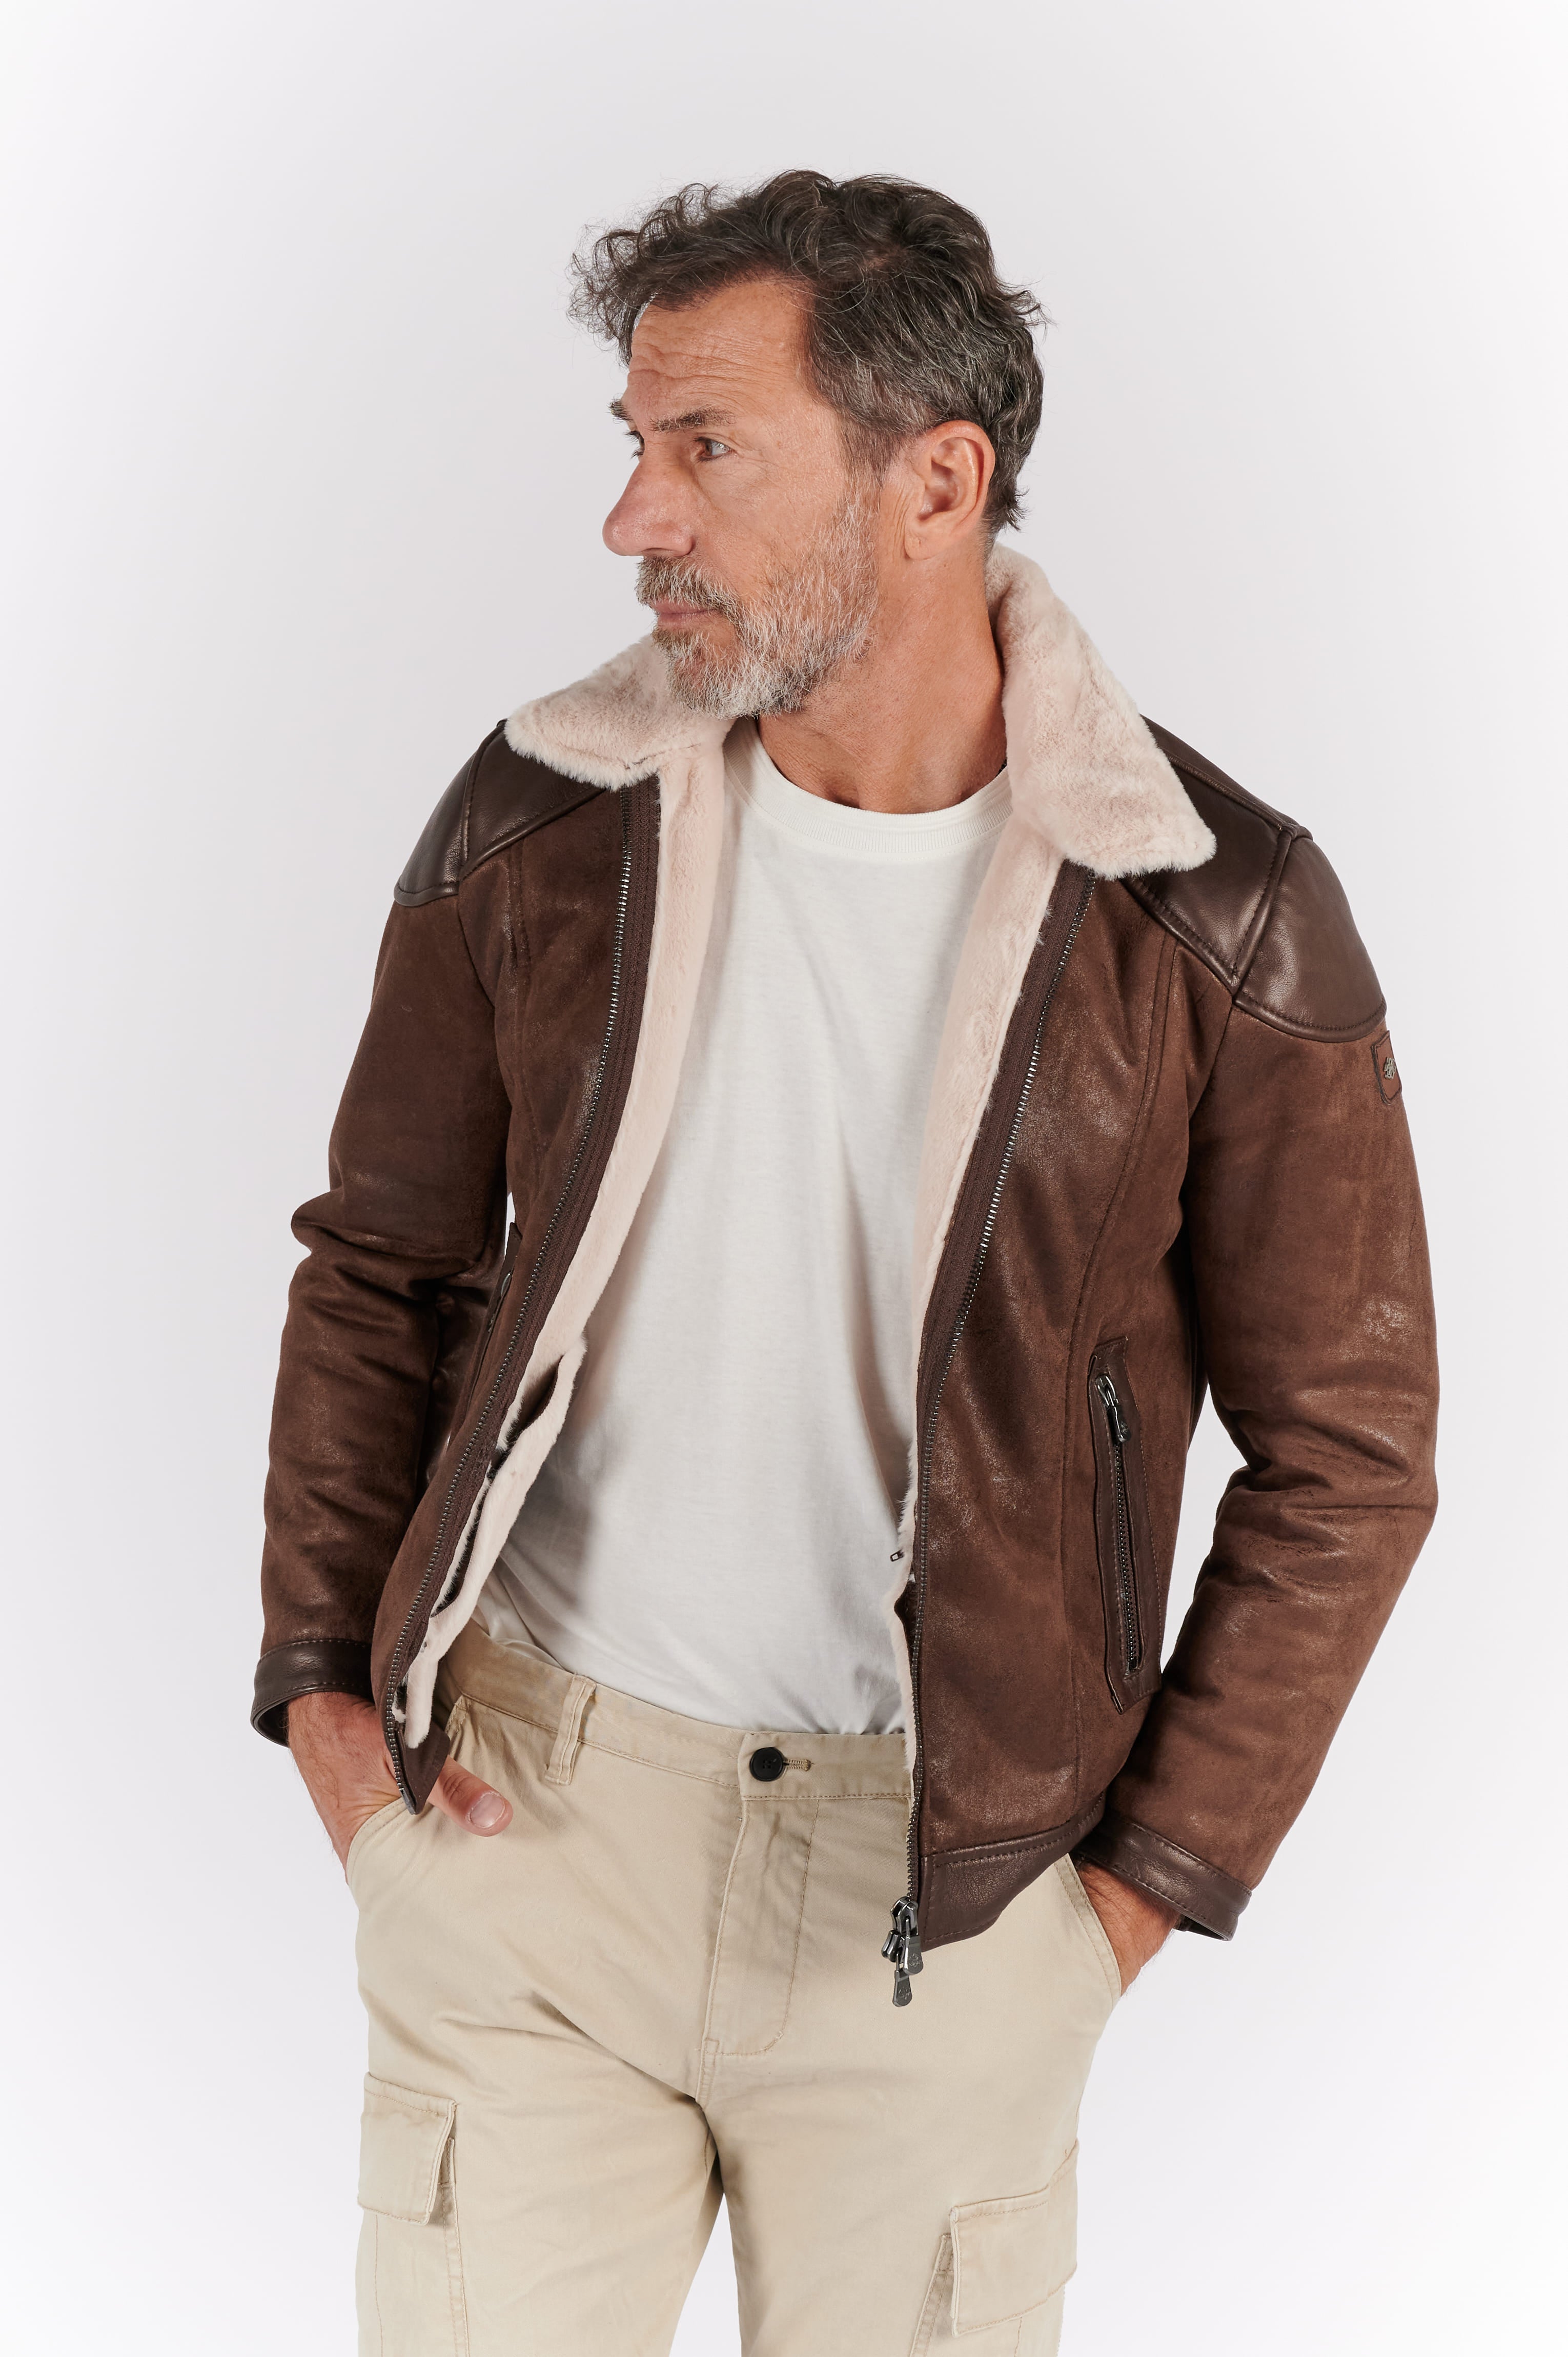 ELTON GOLD COLLETTO SHEARLING STYLE - Barone Firenze